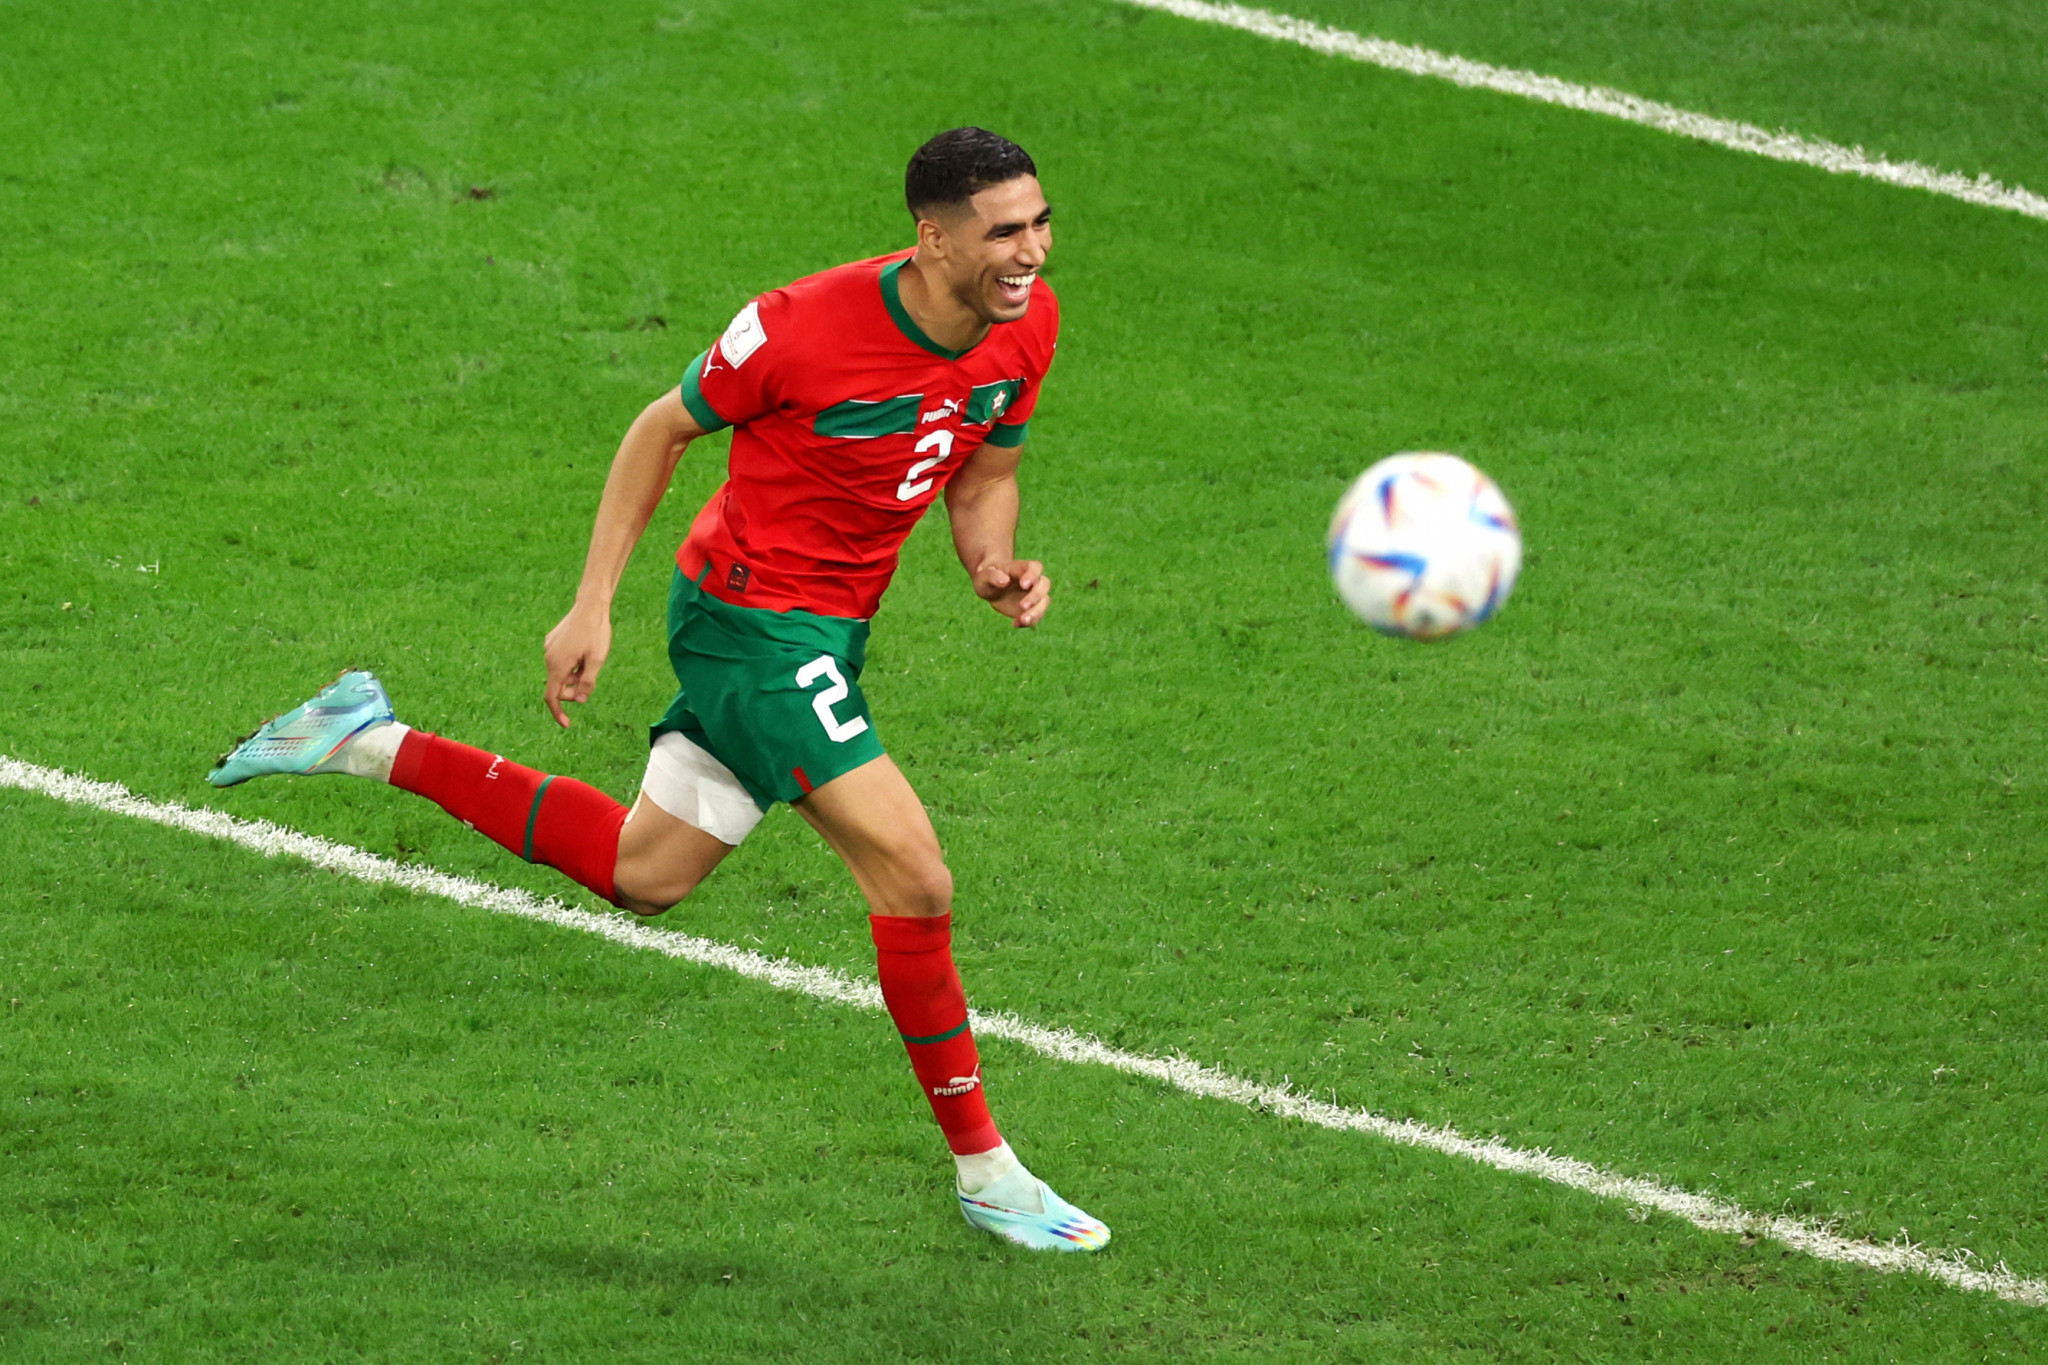 Achraf Hakimi helped Morocco become the first African side to reach the FIFA World Cup semi-finals in Qatar last year ©Getty Images